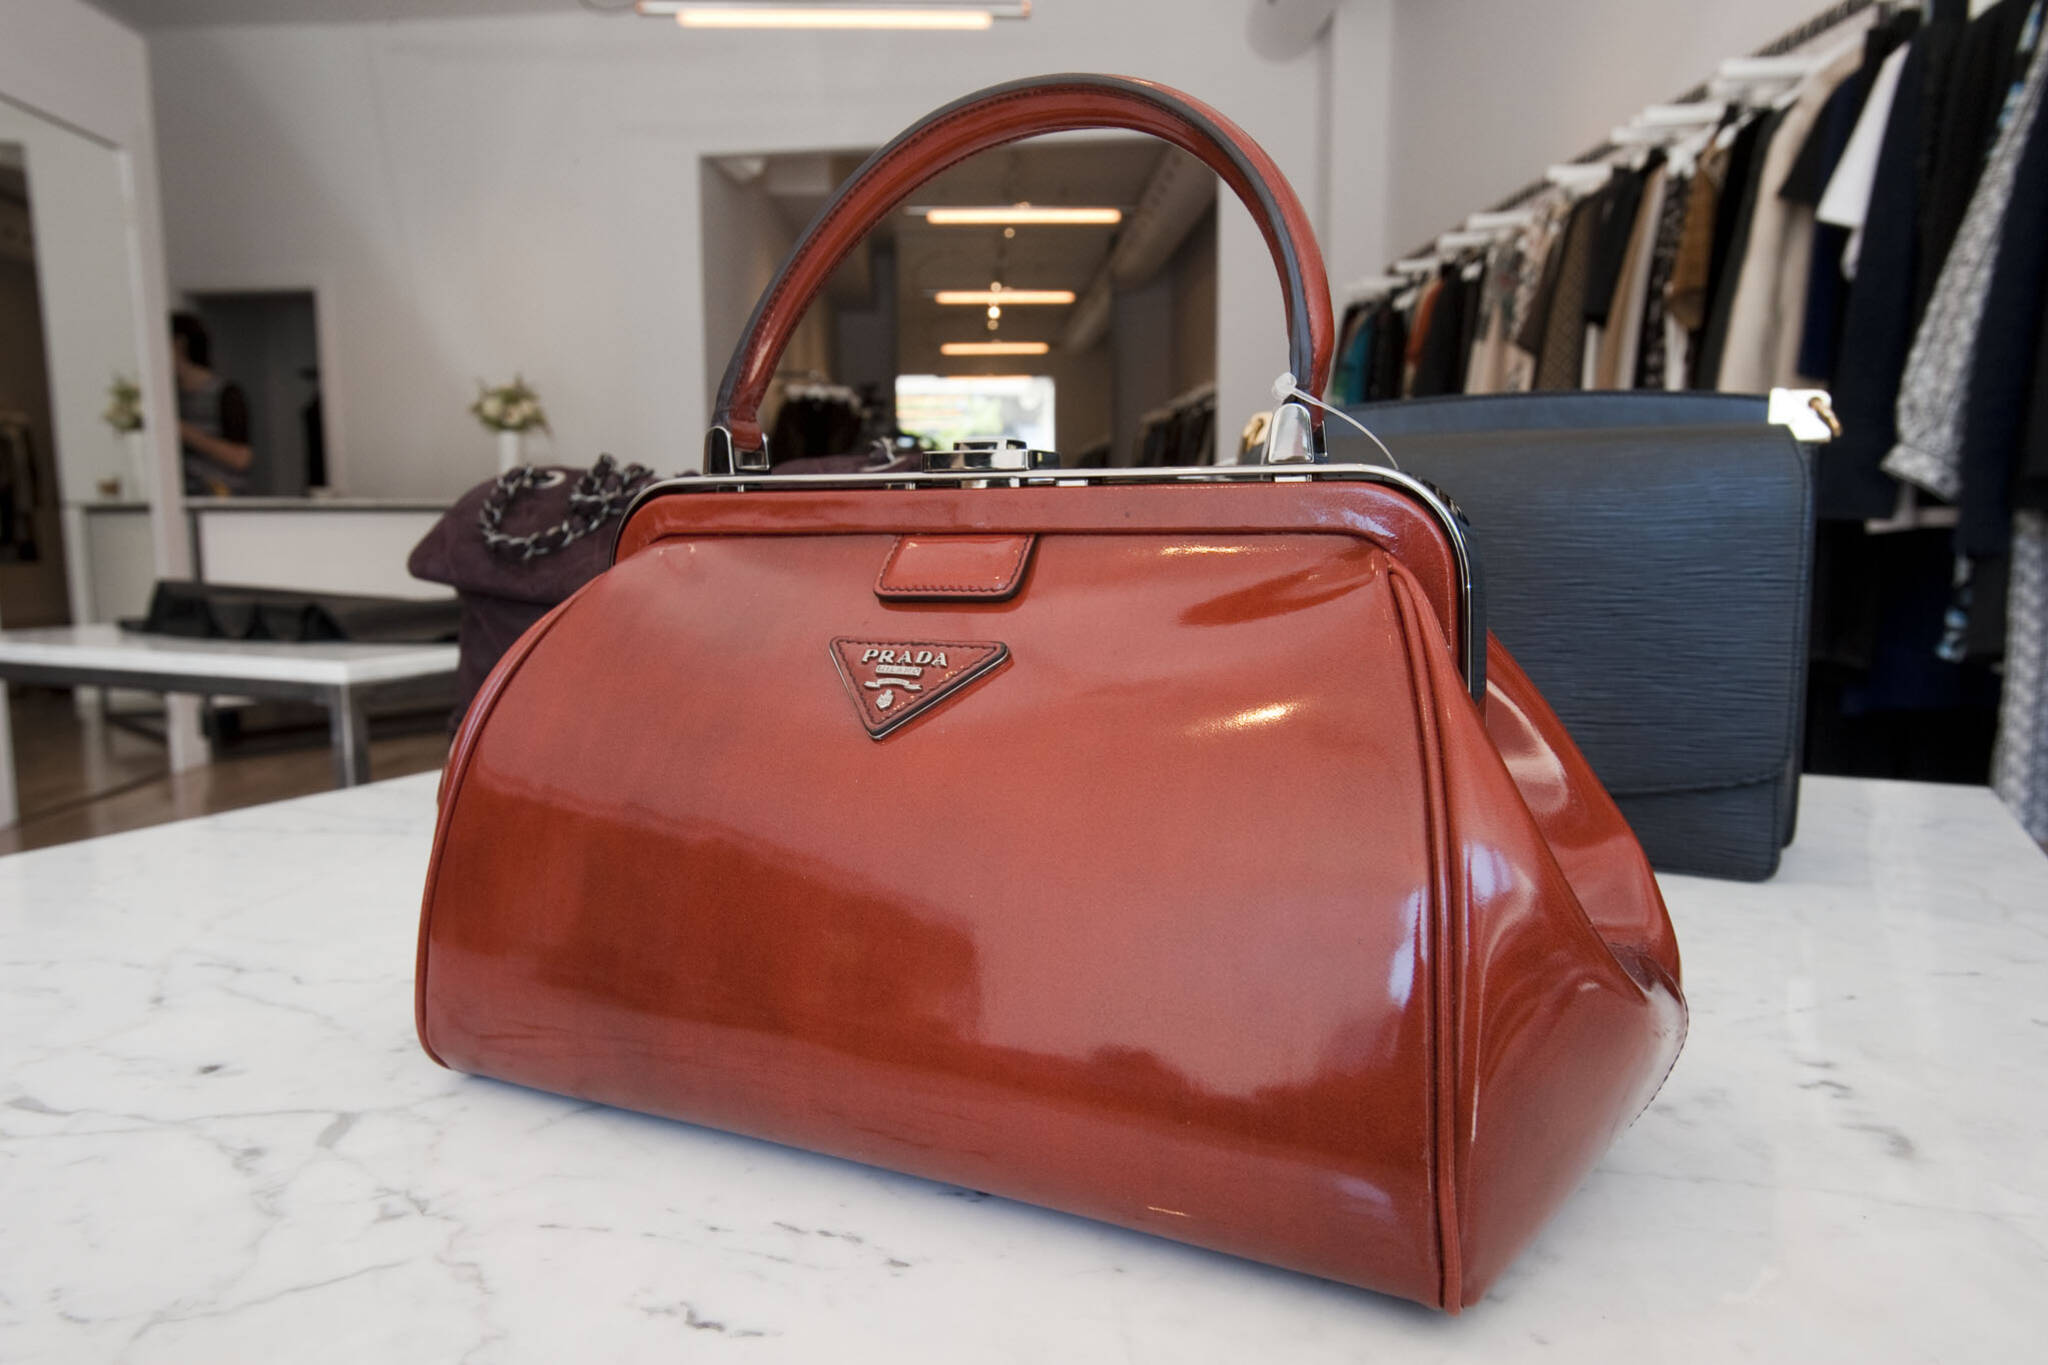 The Best Consignment Stores in Toronto